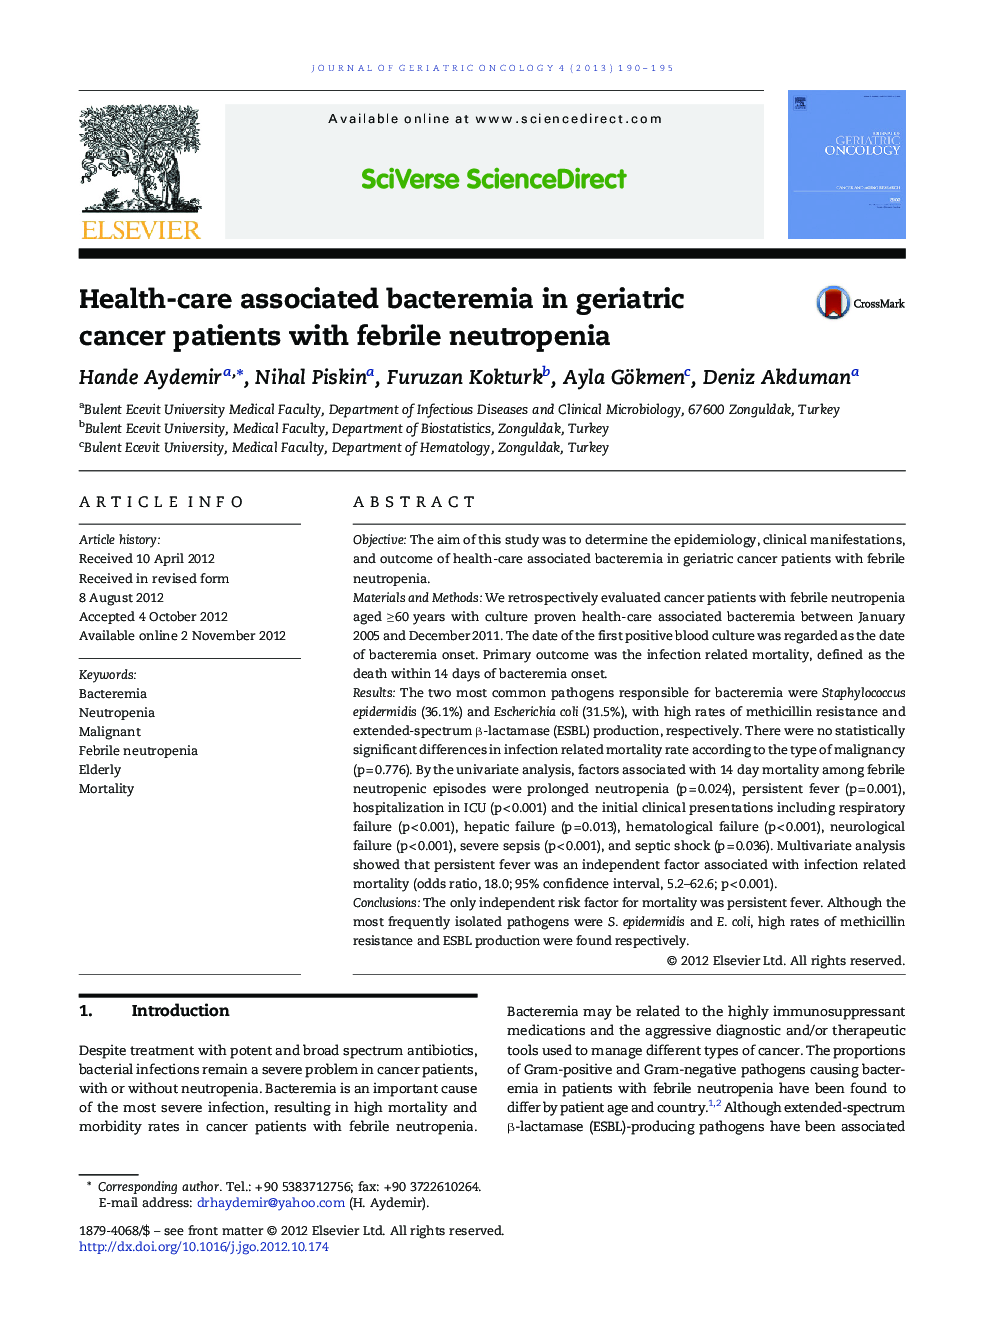 Health-care associated bacteremia in geriatric cancer patients with febrile neutropenia